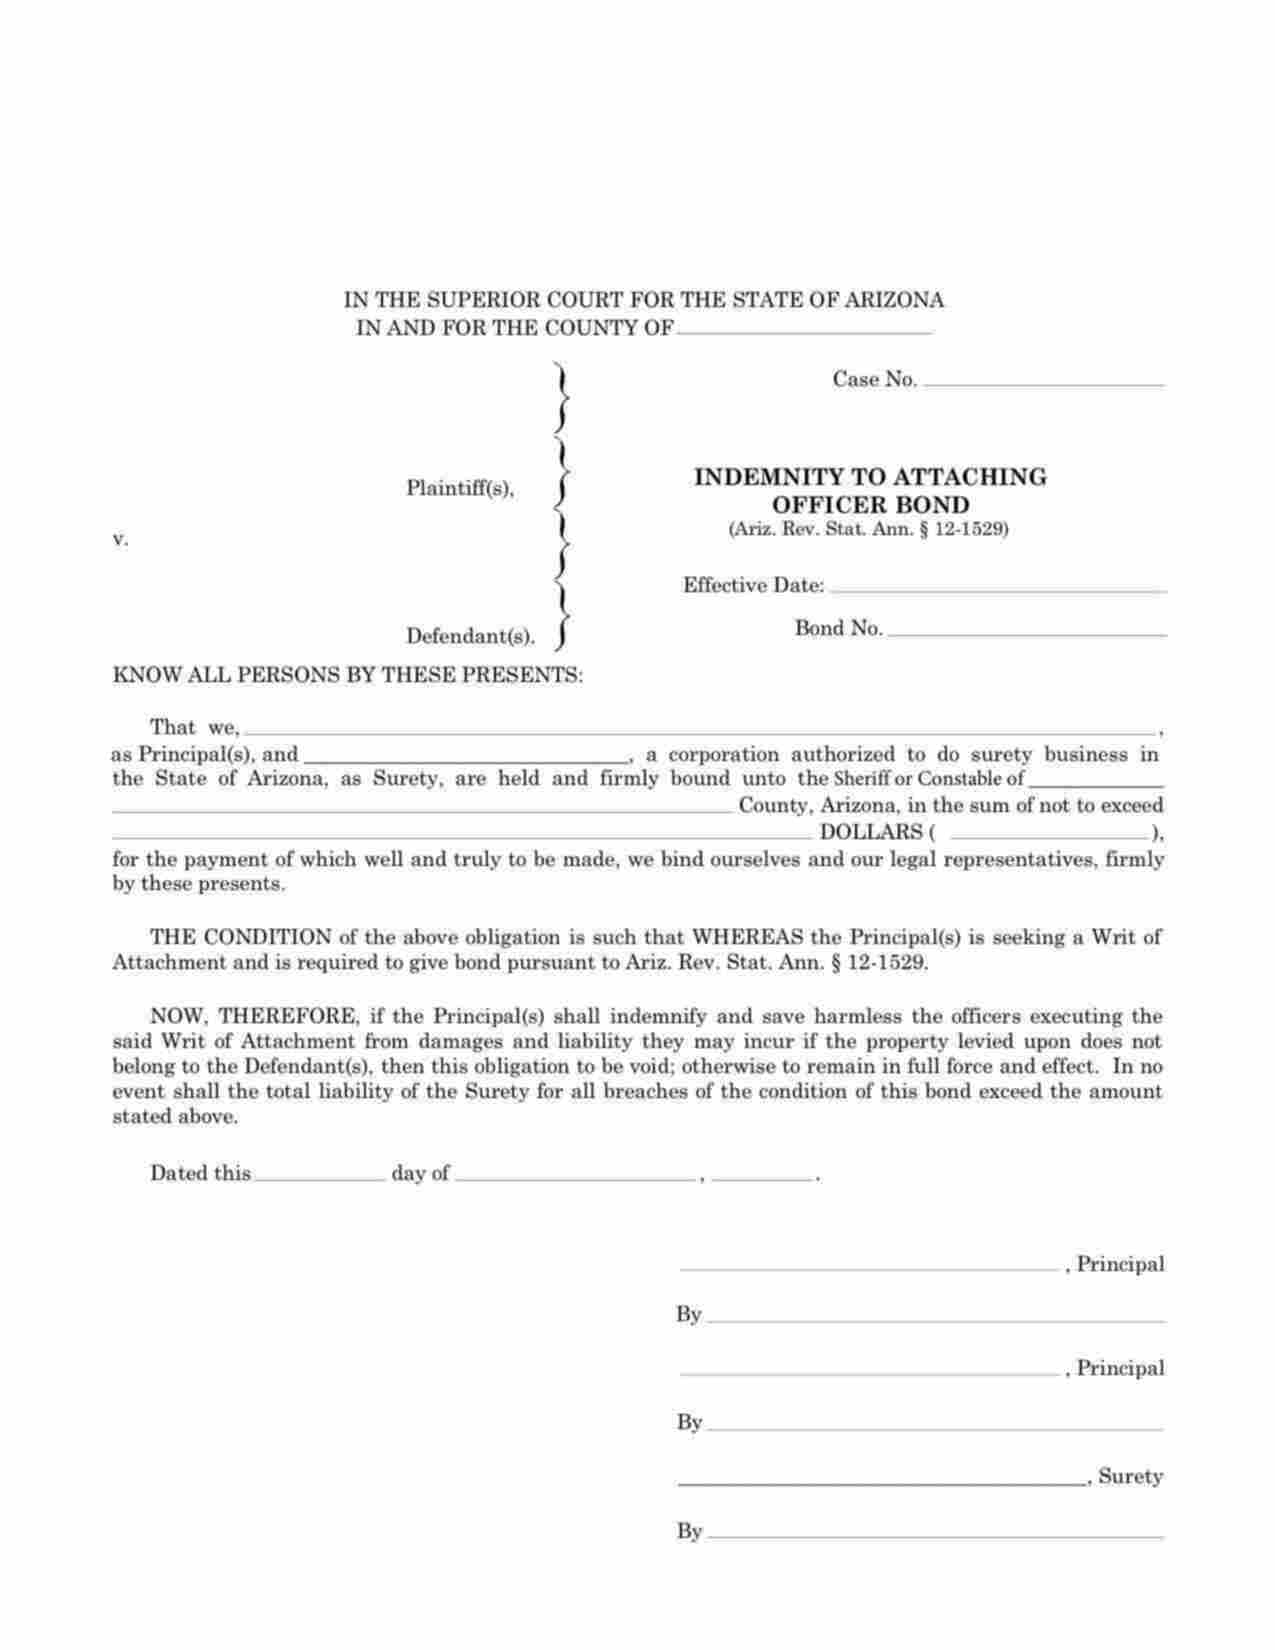 Arizona Indemnity to Attaching Officer Bond Form